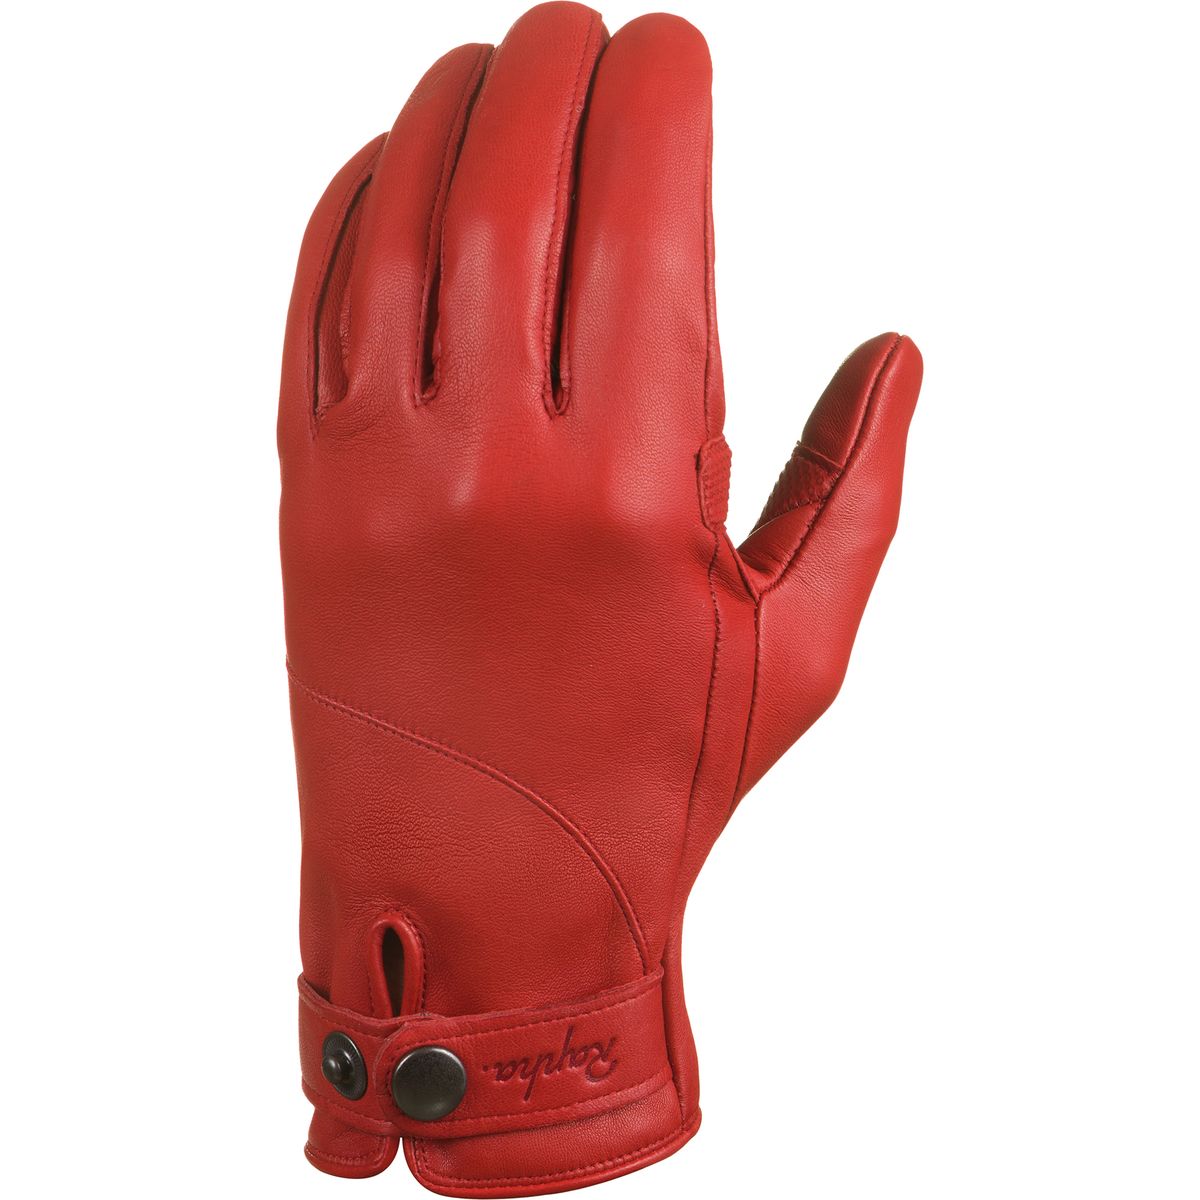 Rapha Leather Town Glove Men's